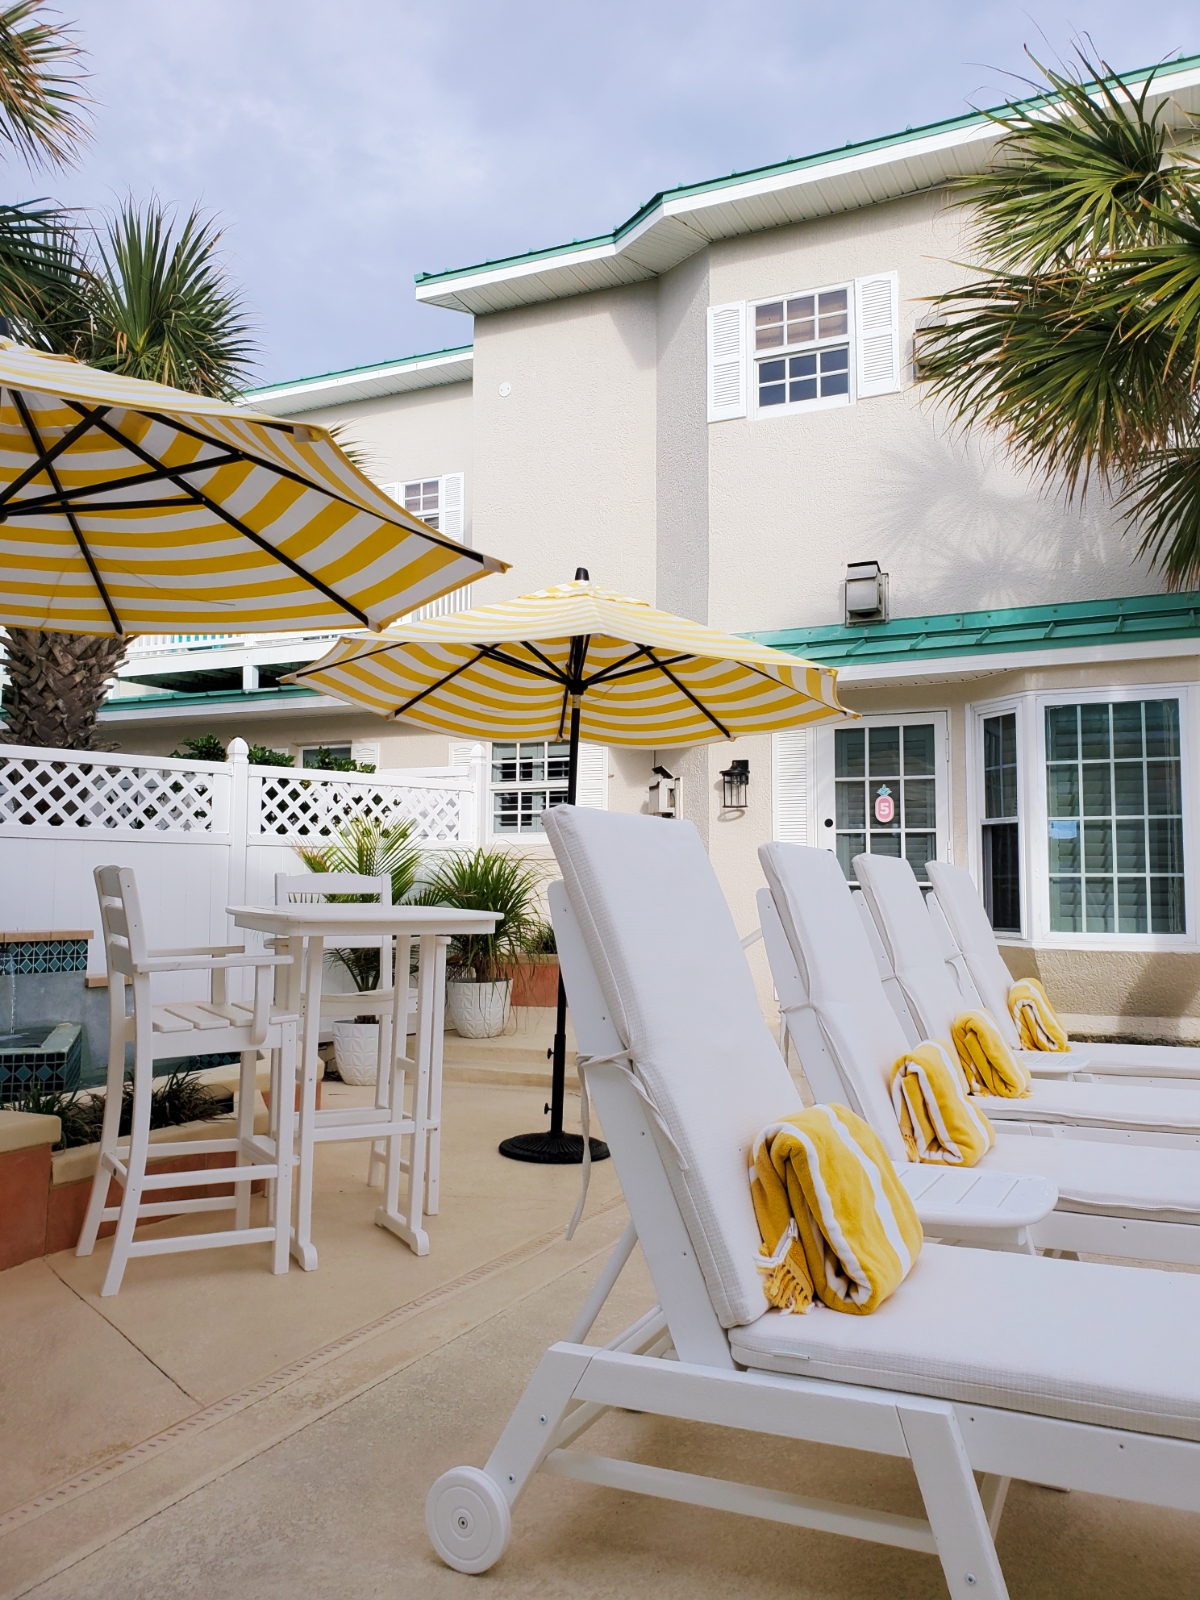 Island Cottage Inn pool lounges, umbrellas, cozy high top tables for coffee or wine